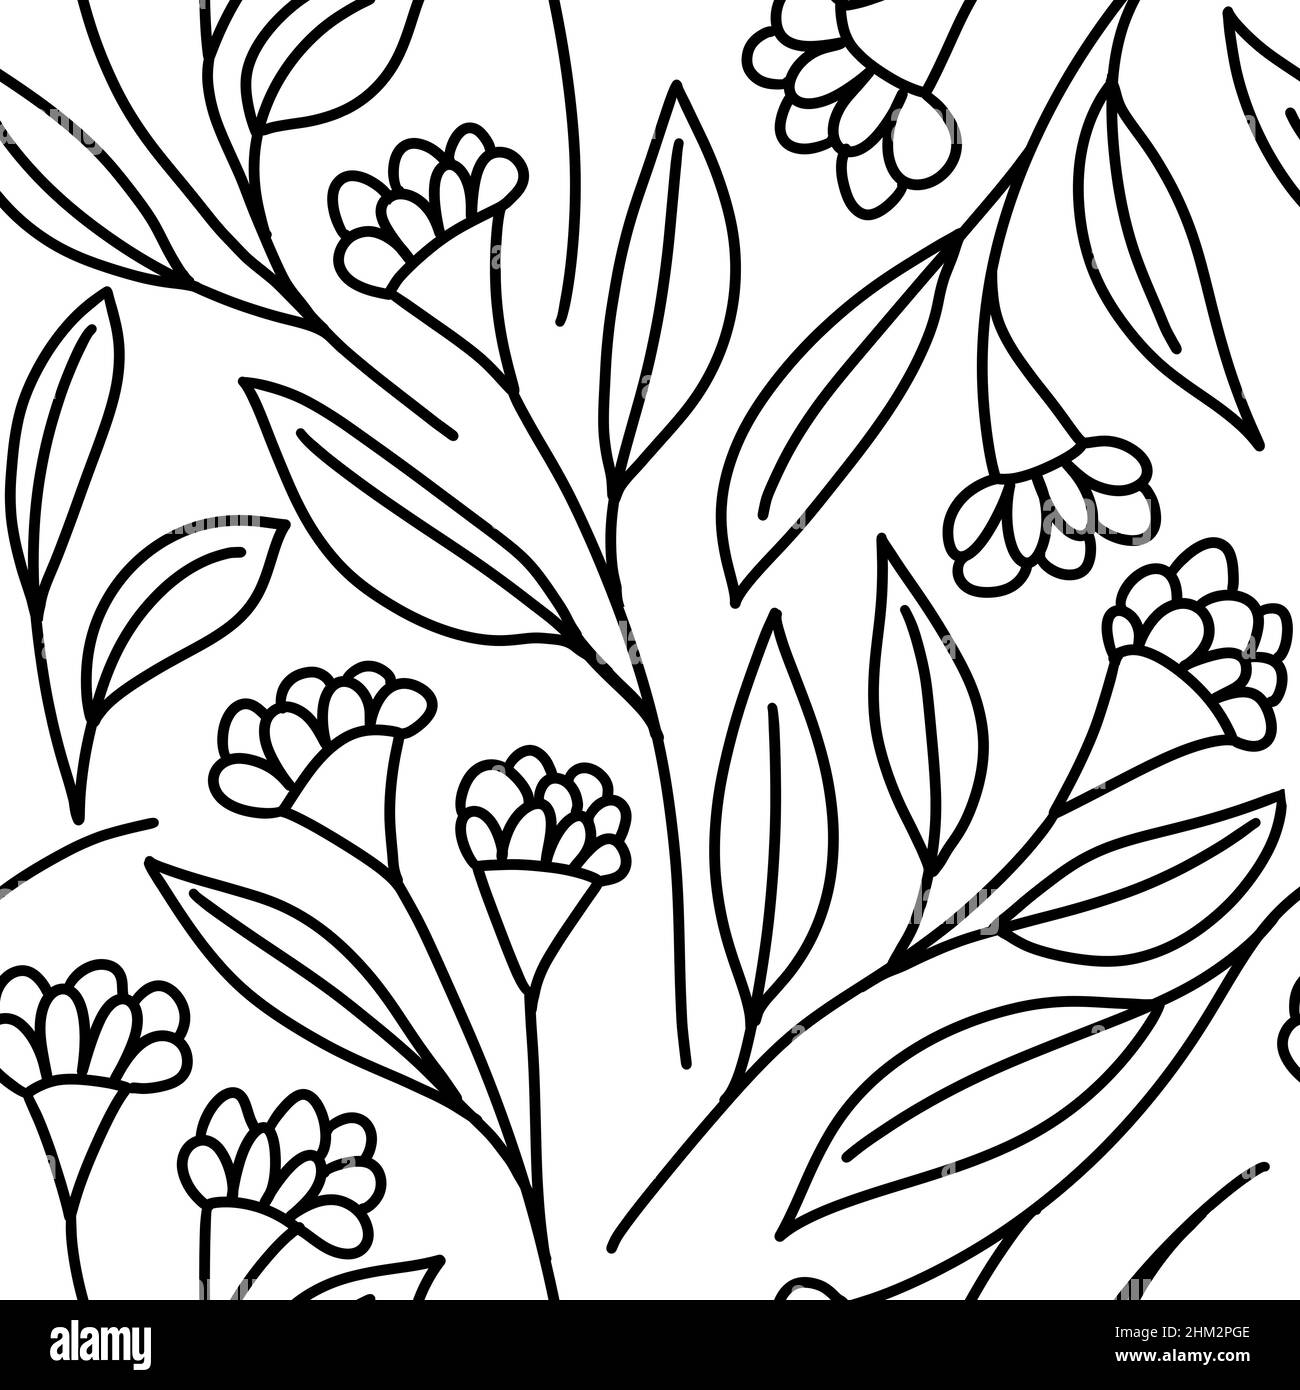 Seamless hand drawn pattern with black and white flowers floral botanical  elements, leaves leaf branch blossom.